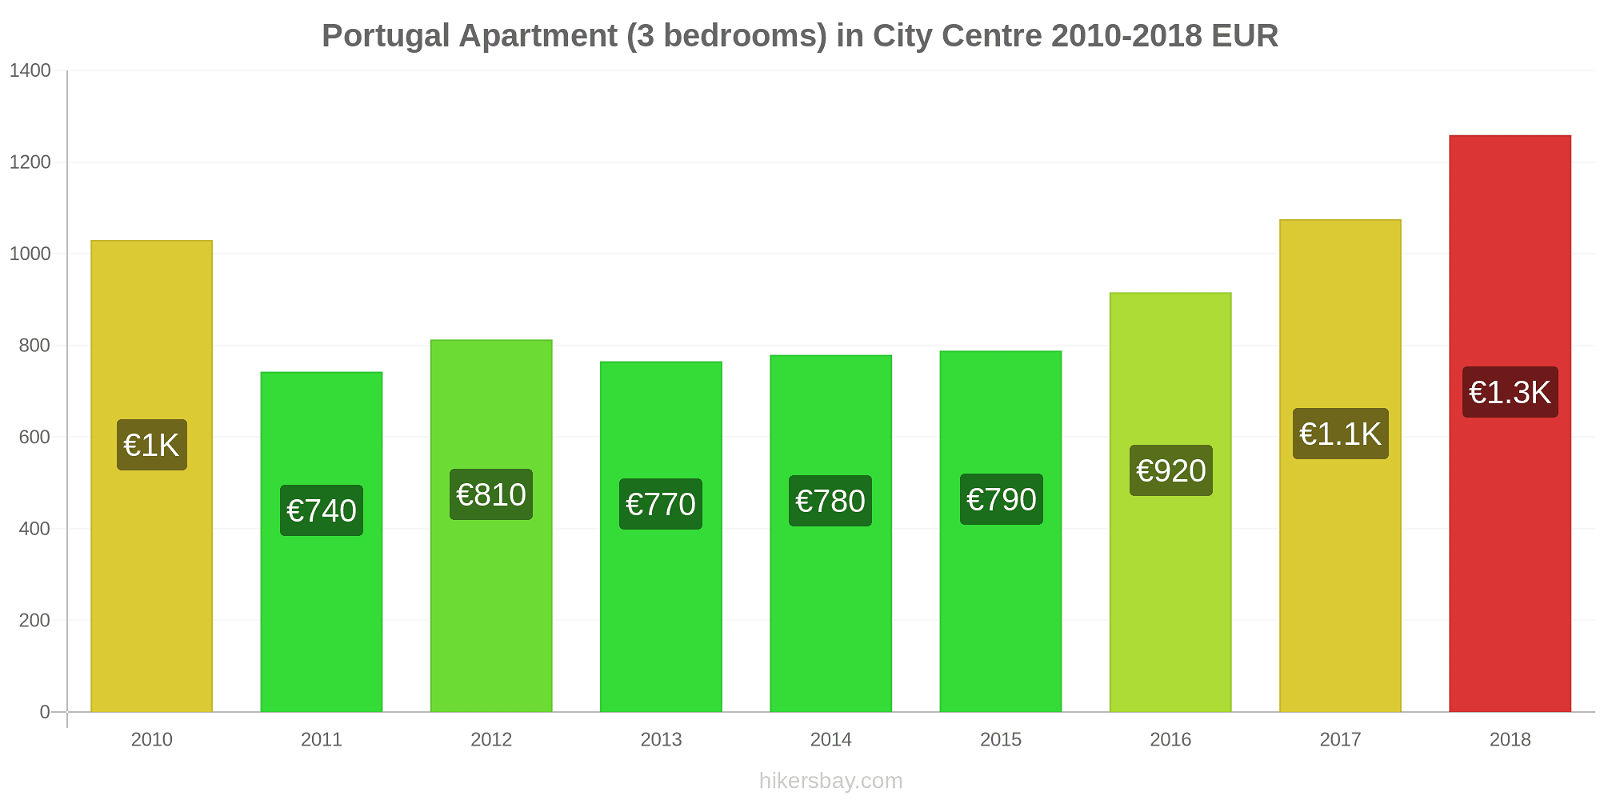 Portugal price changes Apartment (3 bedrooms) in City Centre hikersbay.com